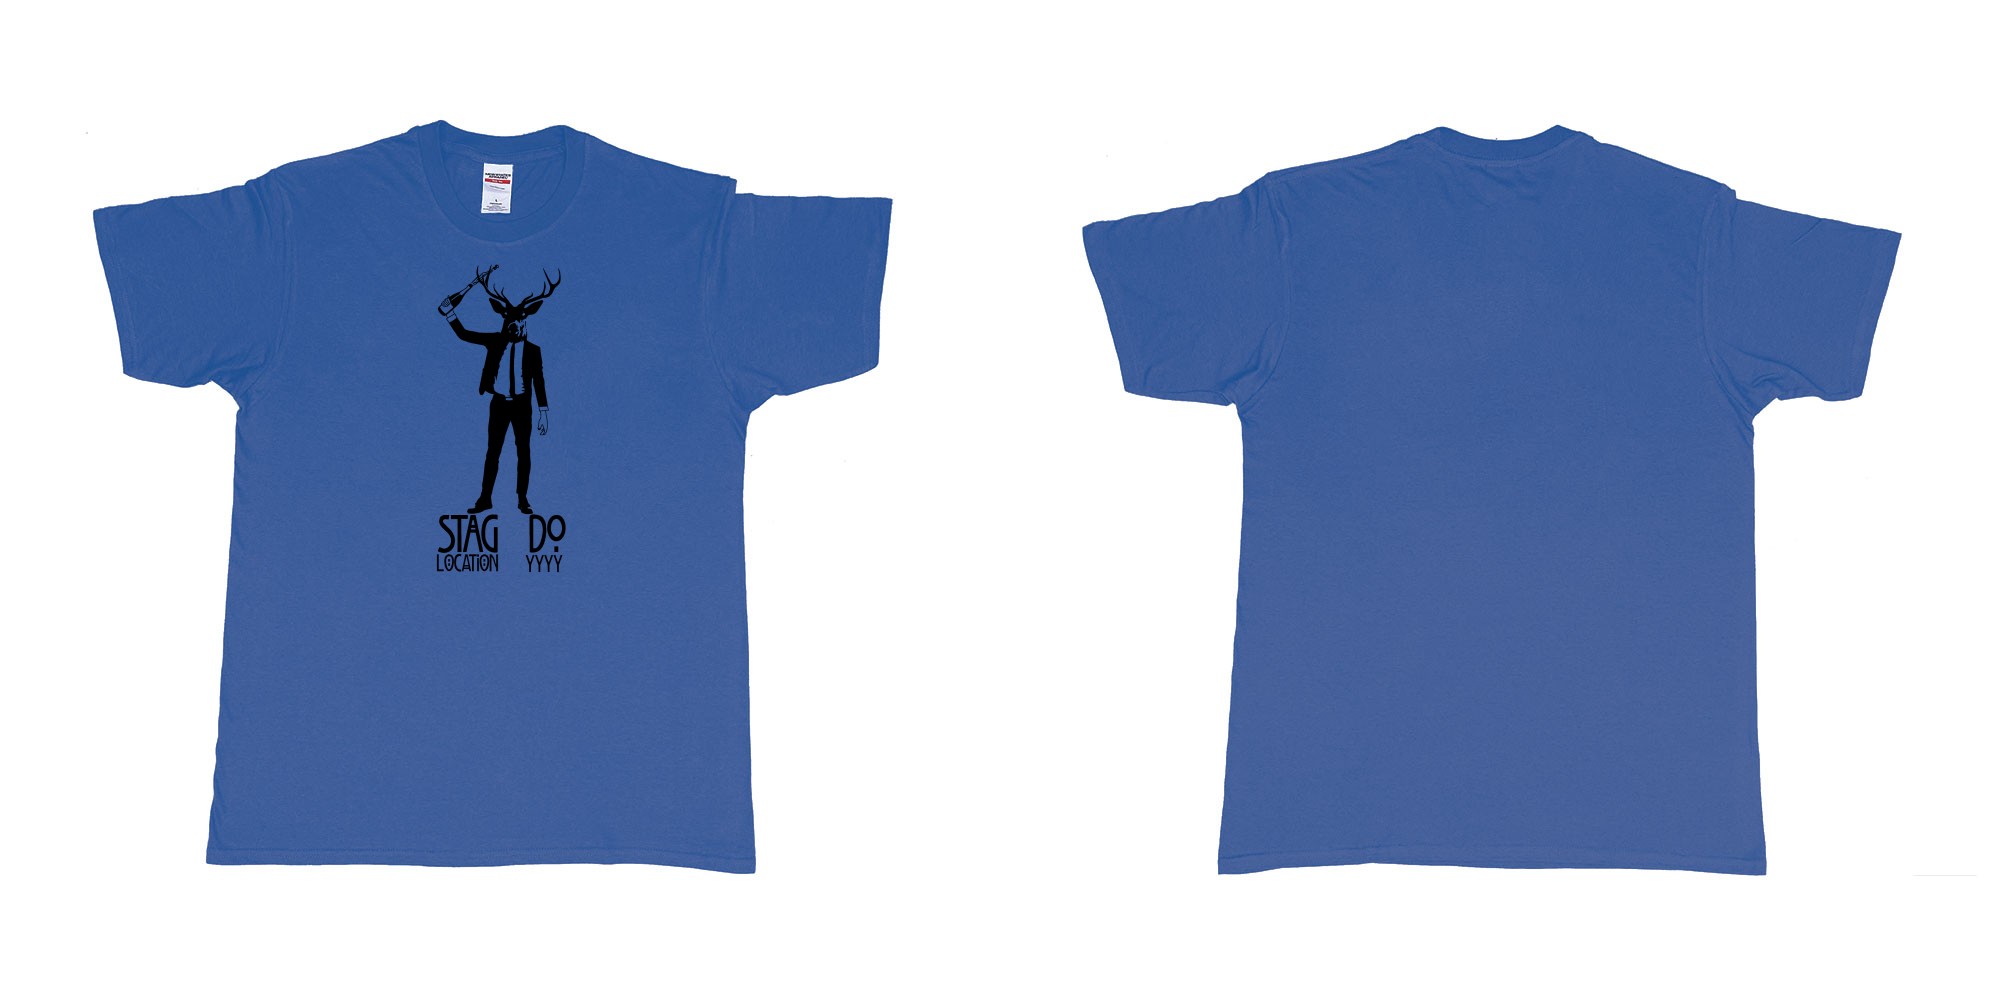 Custom tshirt design stag business man champagne in fabric color royal-blue choice your own text made in Bali by The Pirate Way